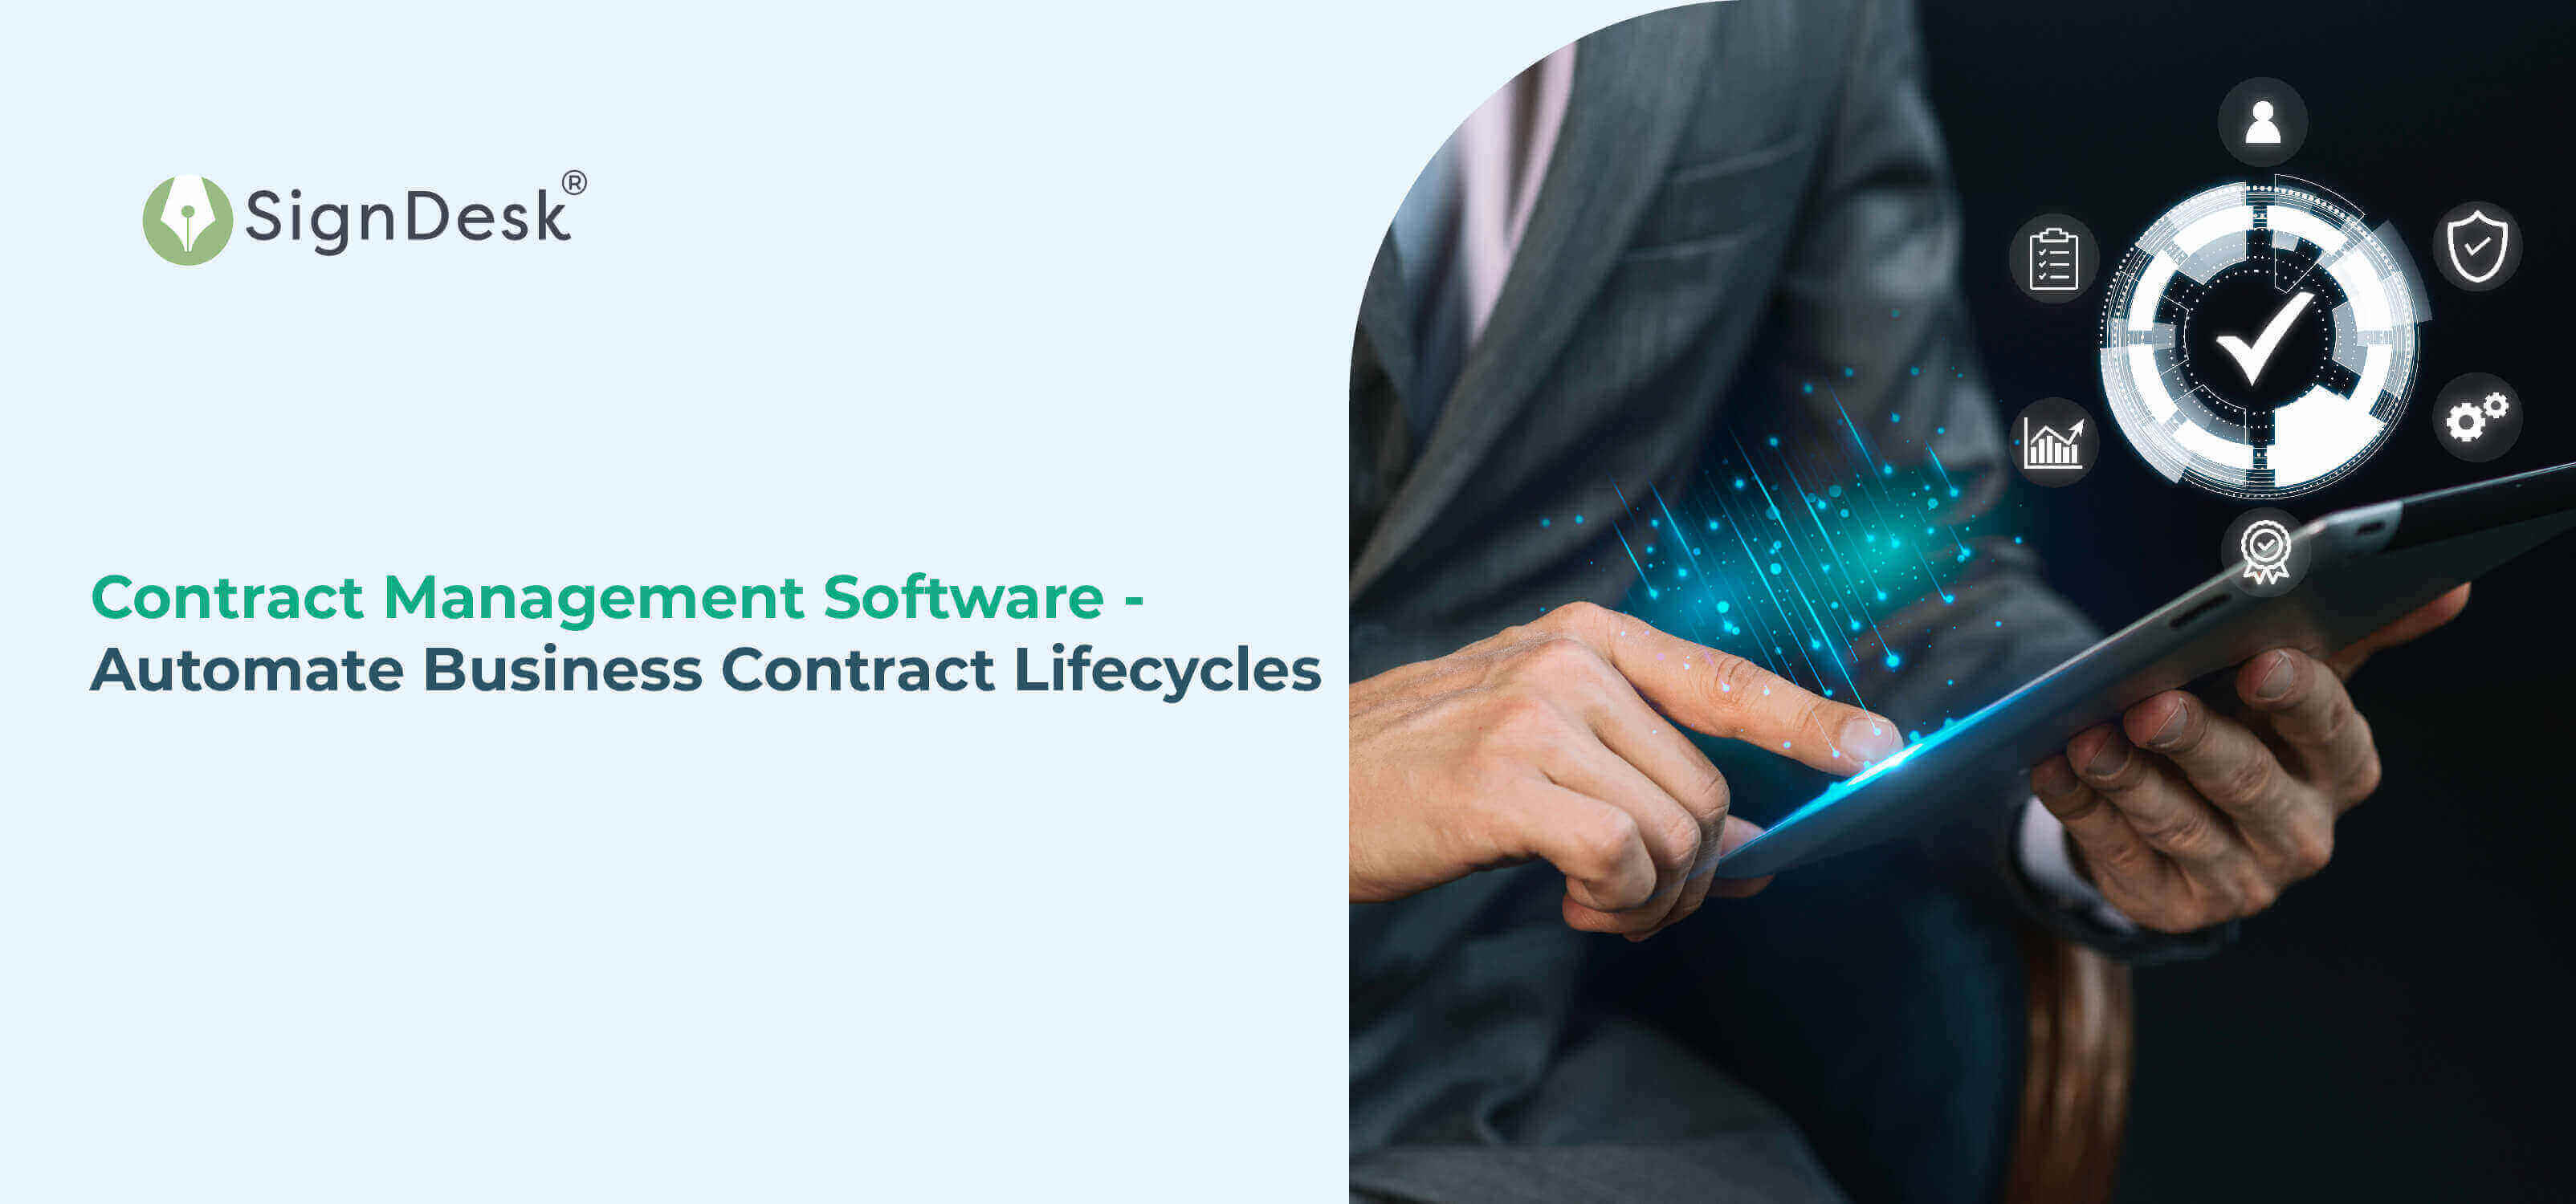 Contract Management Software - Automate Business Contract Lifecycles